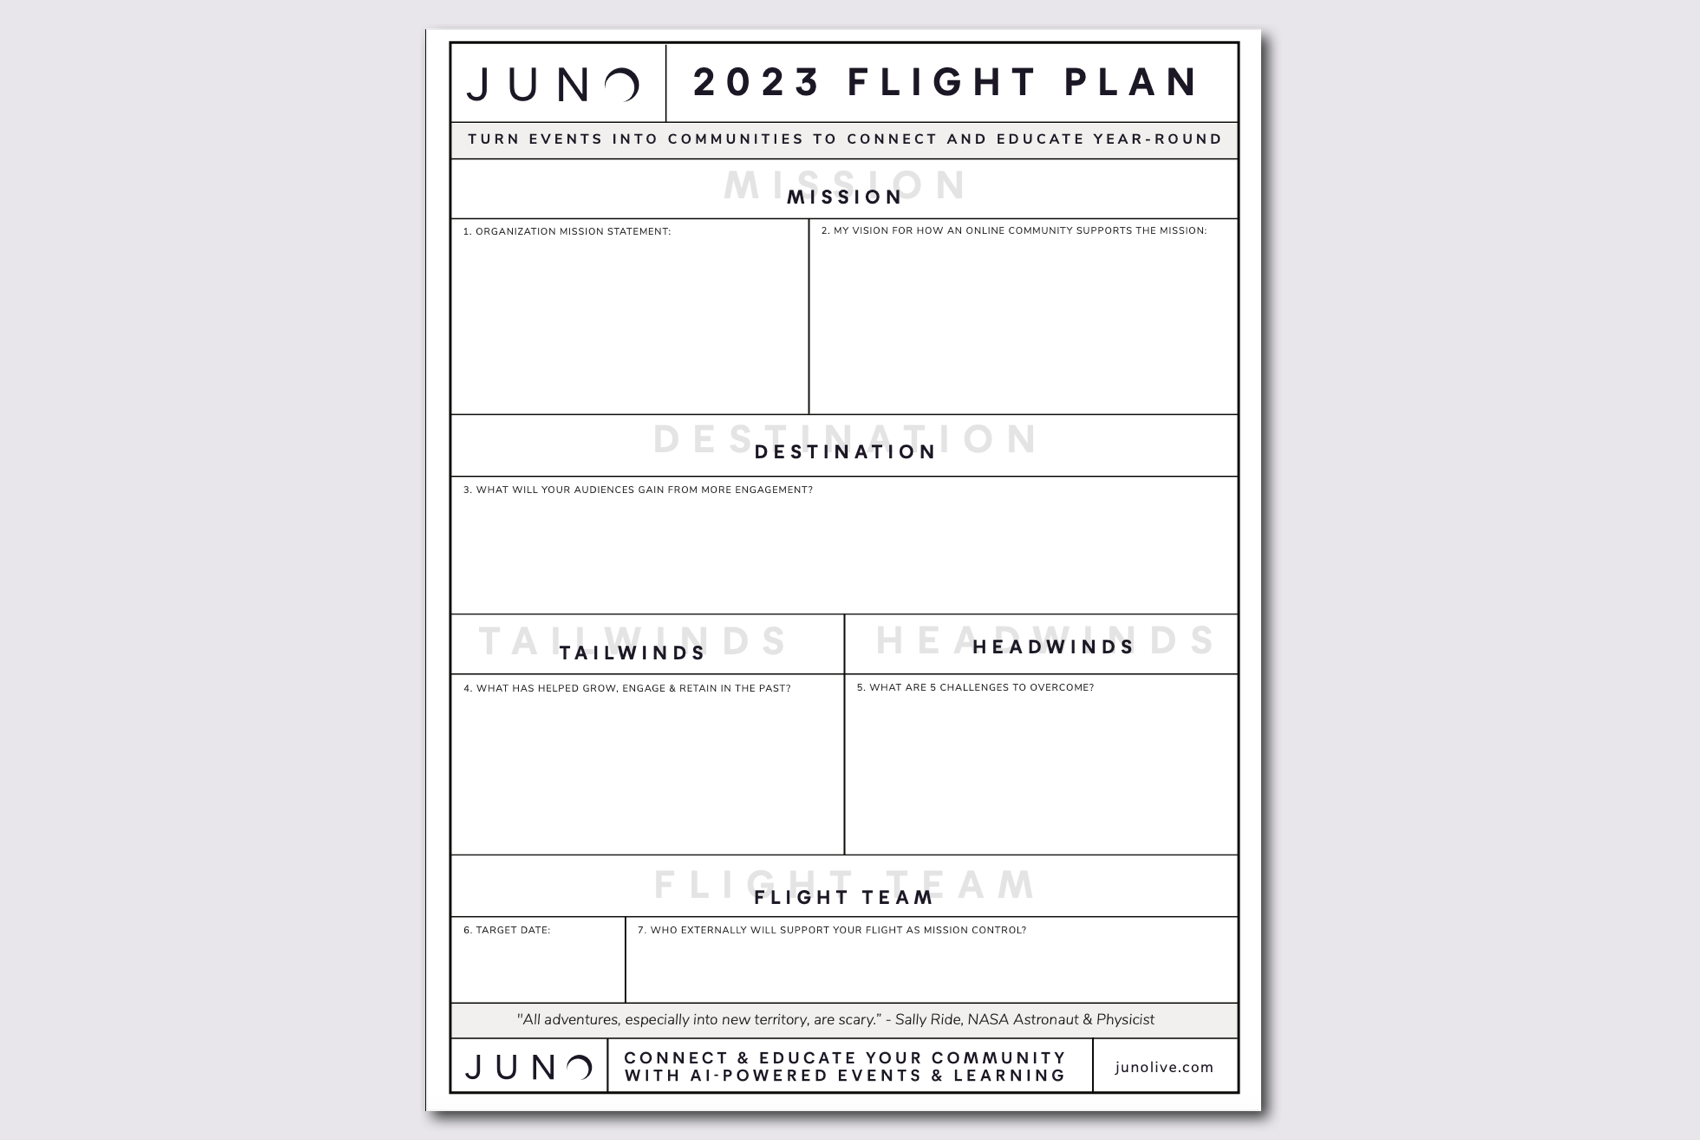 A preview of the Flight Plan document, with blank form fields.